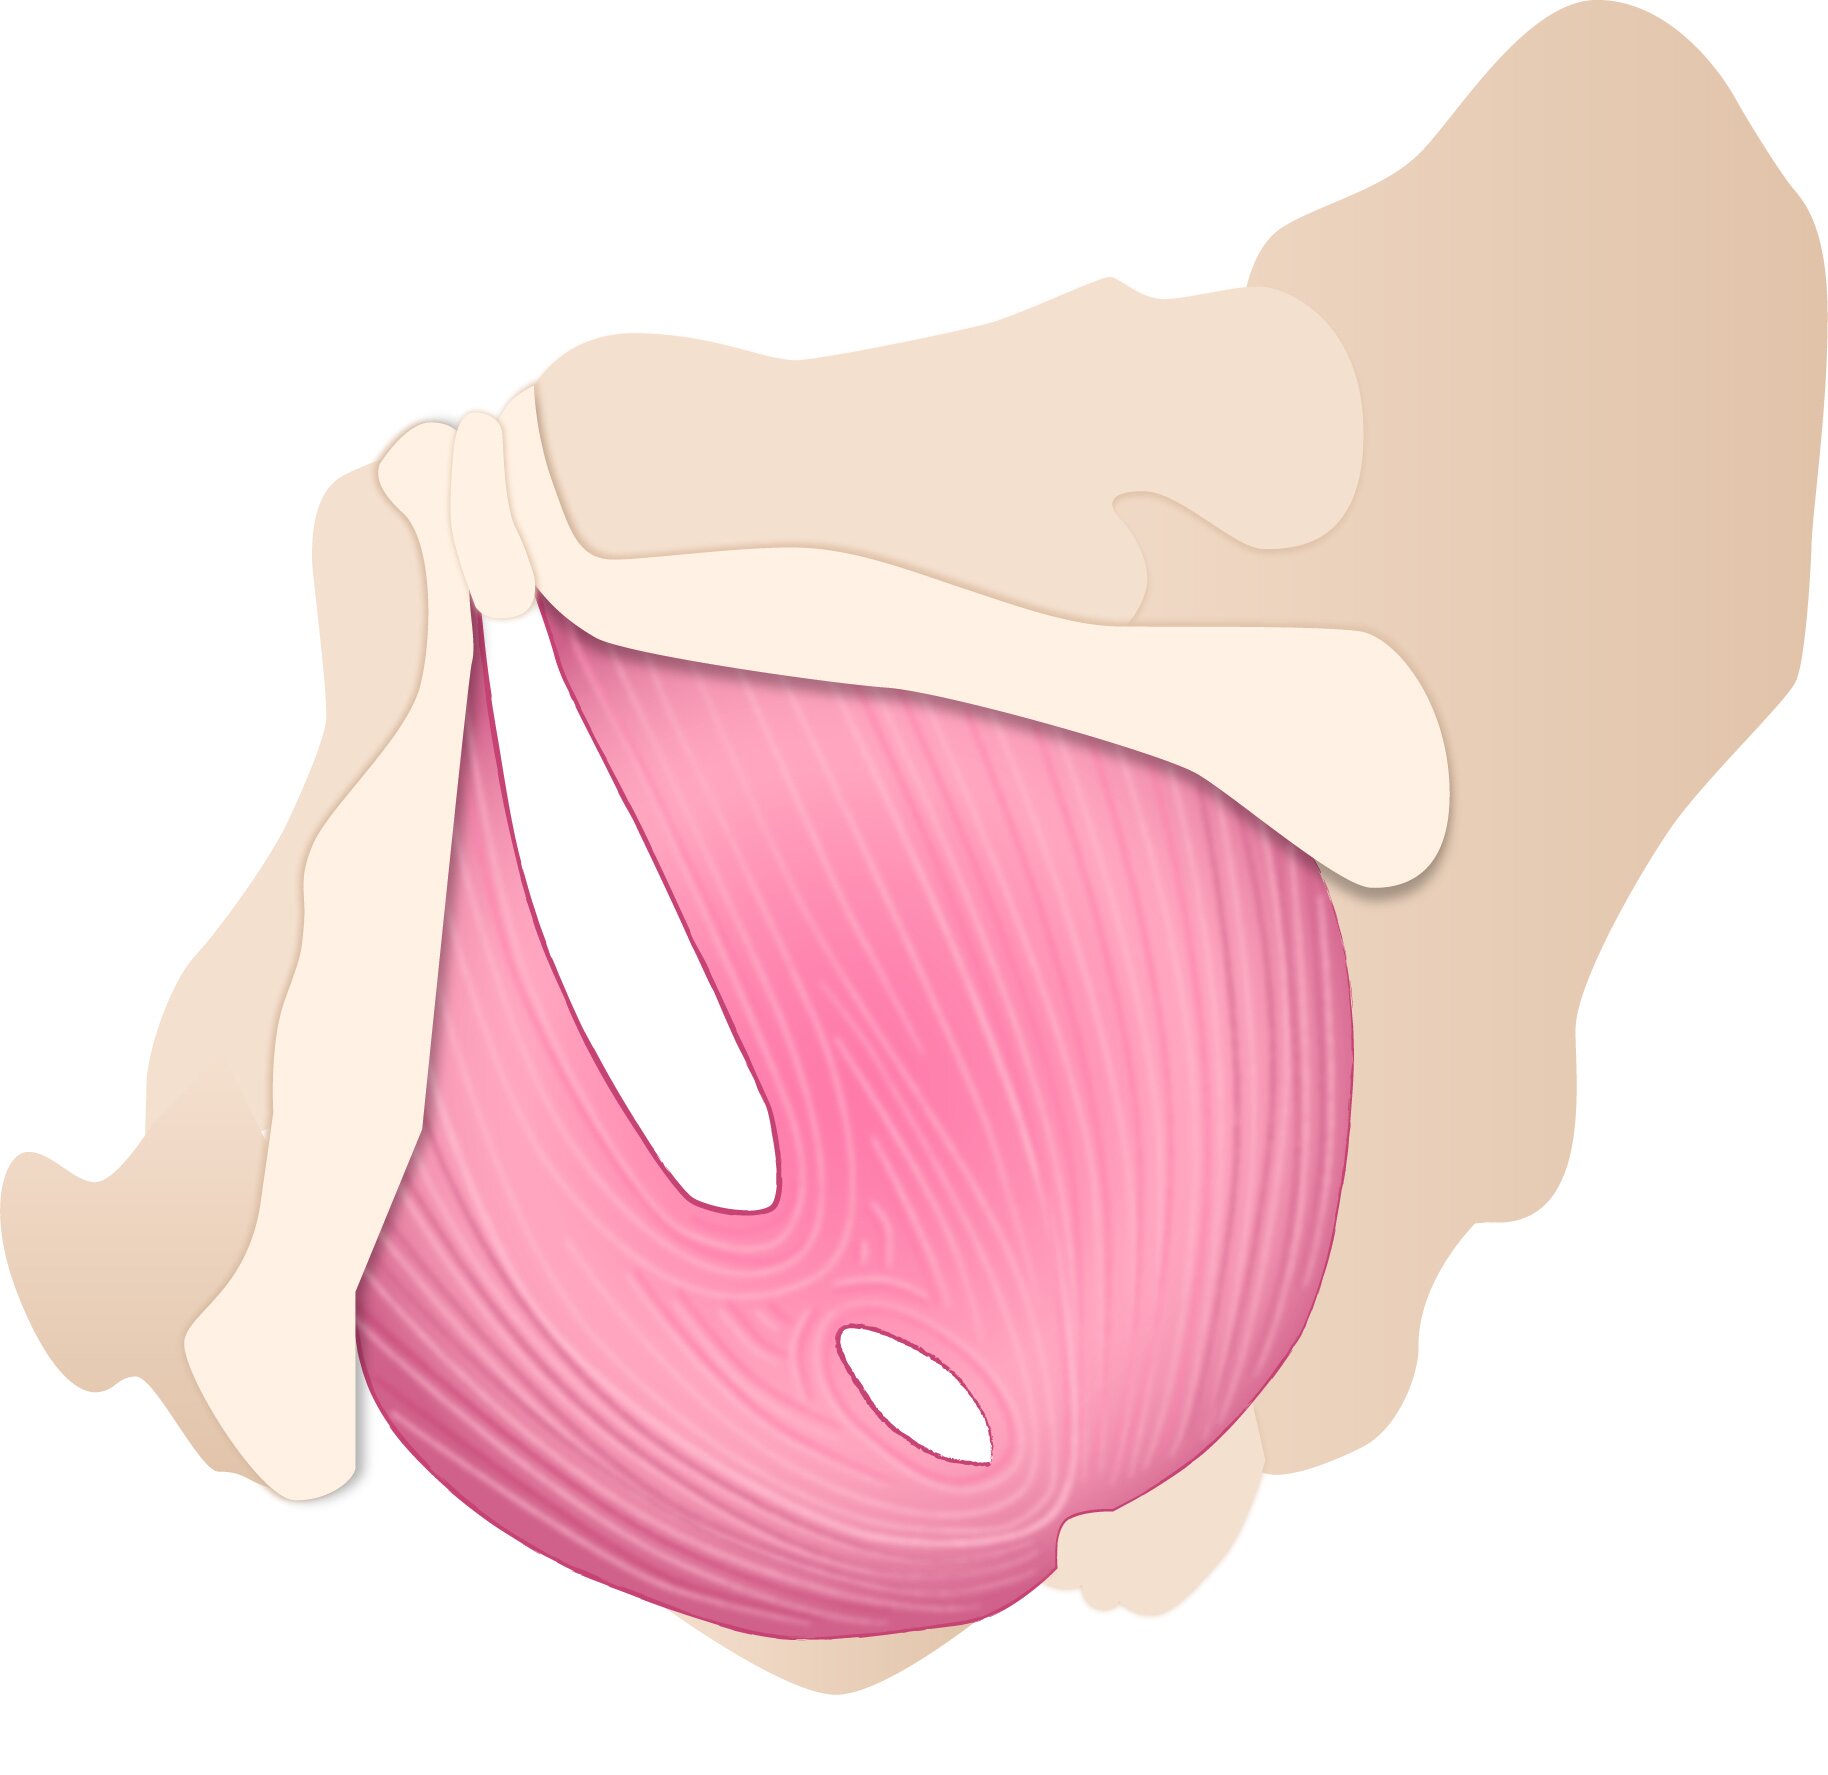 Third layer of the pelvic floor muscles